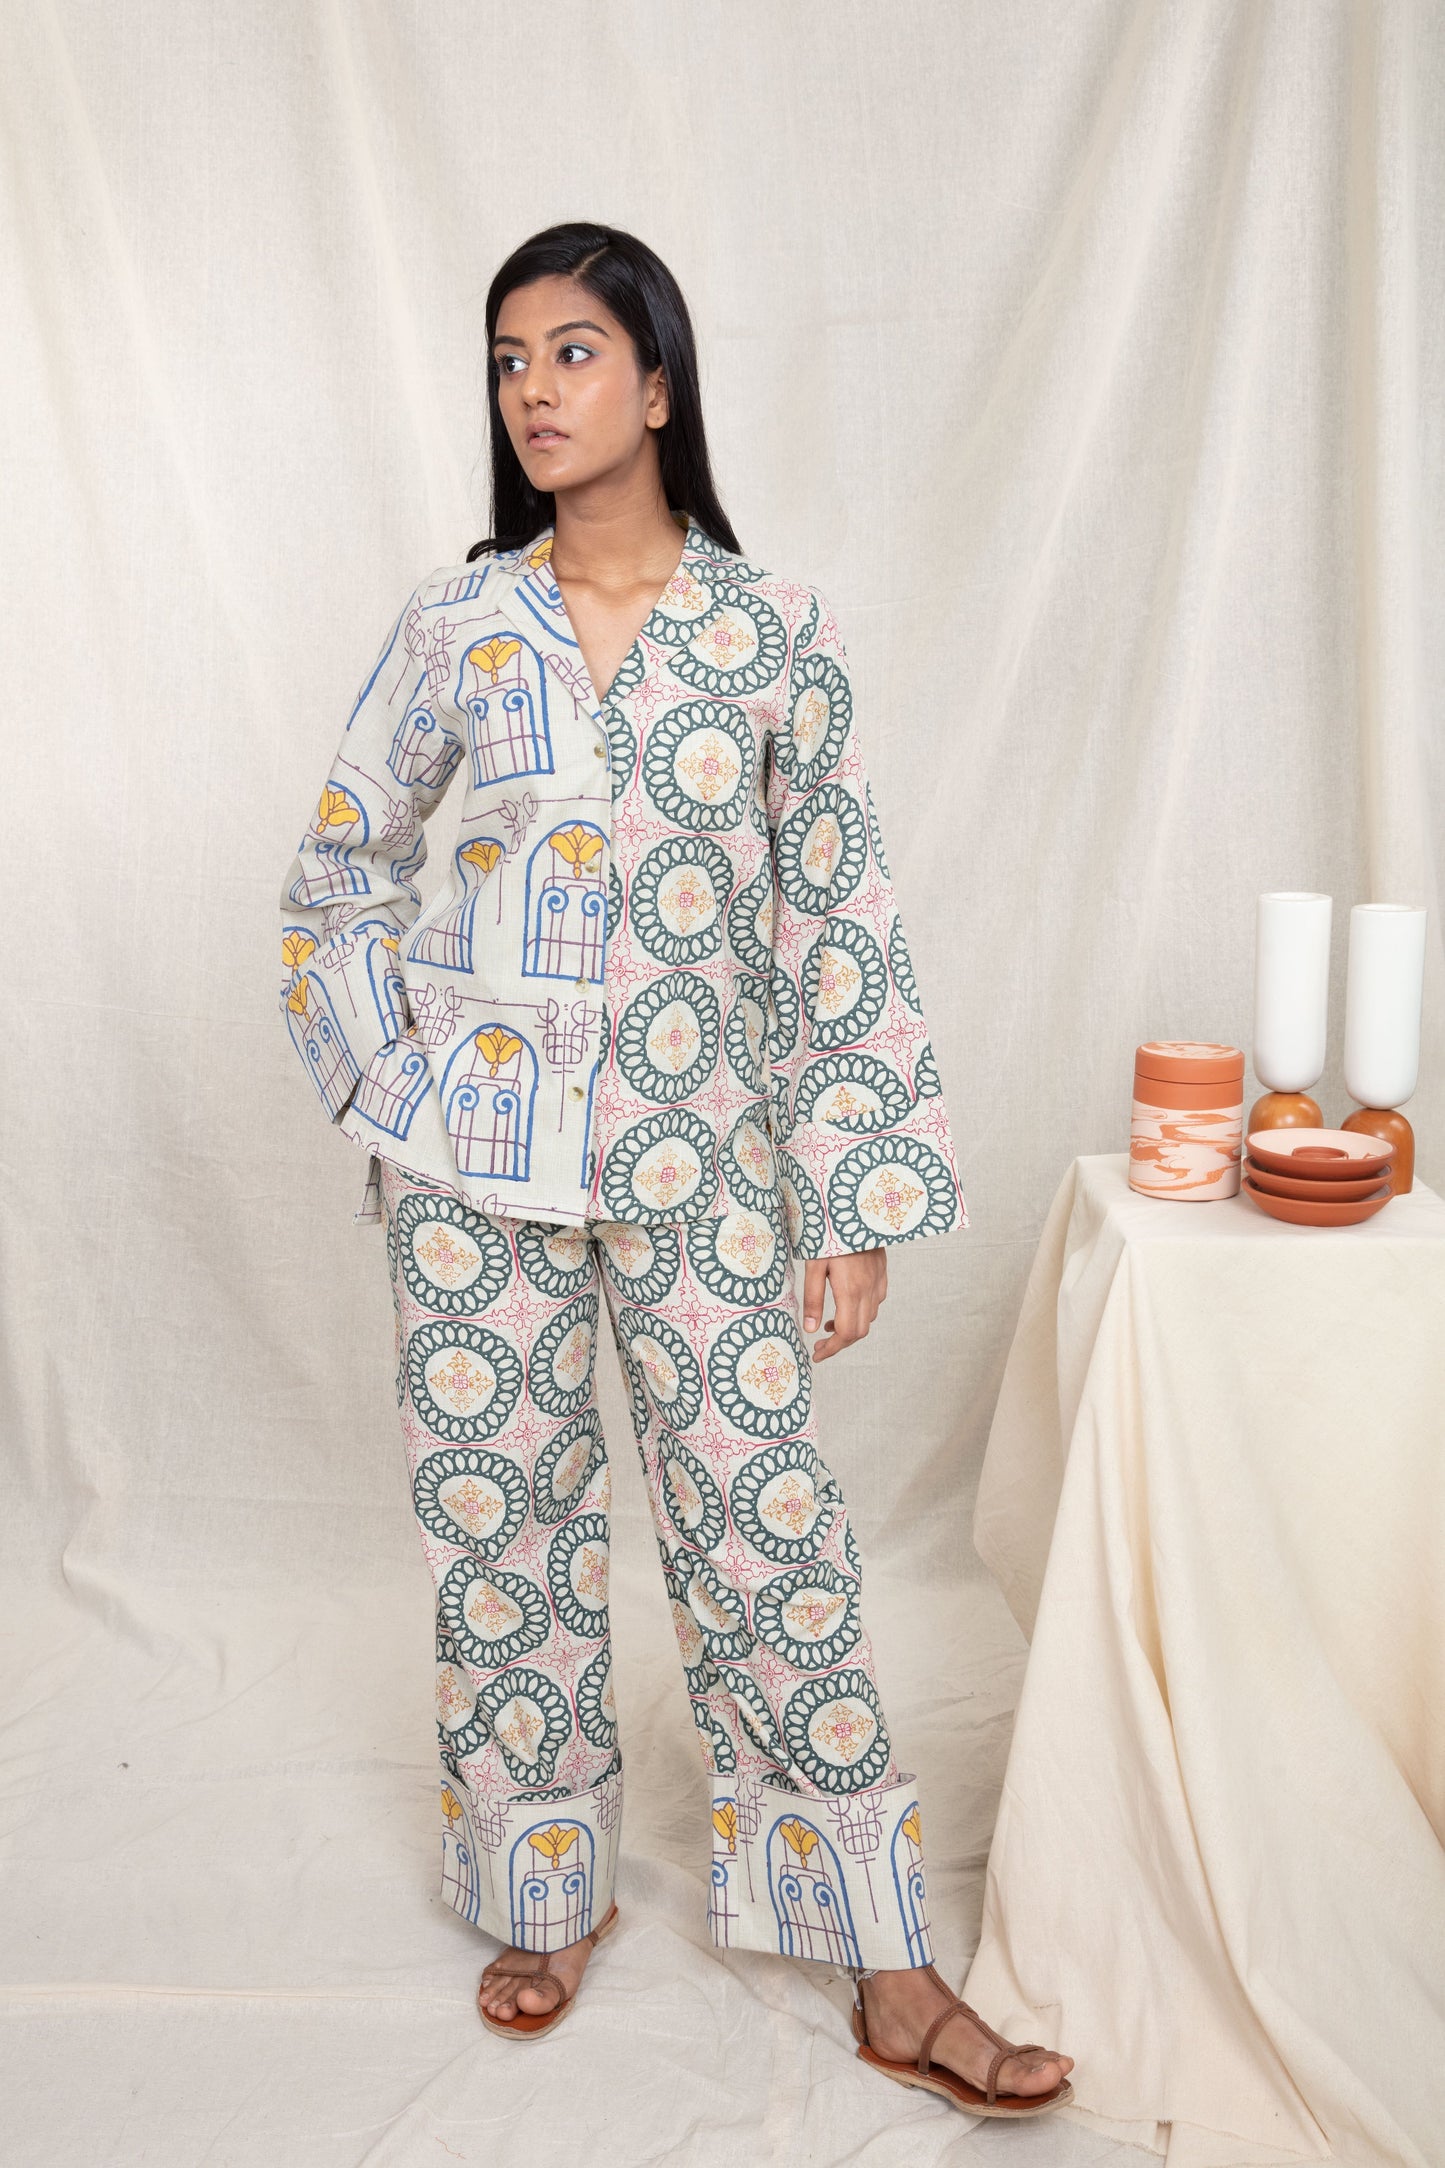 Multicolor Print Shirt at Kamakhyaa by Anushé Pirani. This item is Block Prints, Handwoven Cotton, Lounge Wear, Multicolor, Natural, Prints, Recurring Dream Collection, Regular Fit, Shirts, Tops, Womenswear